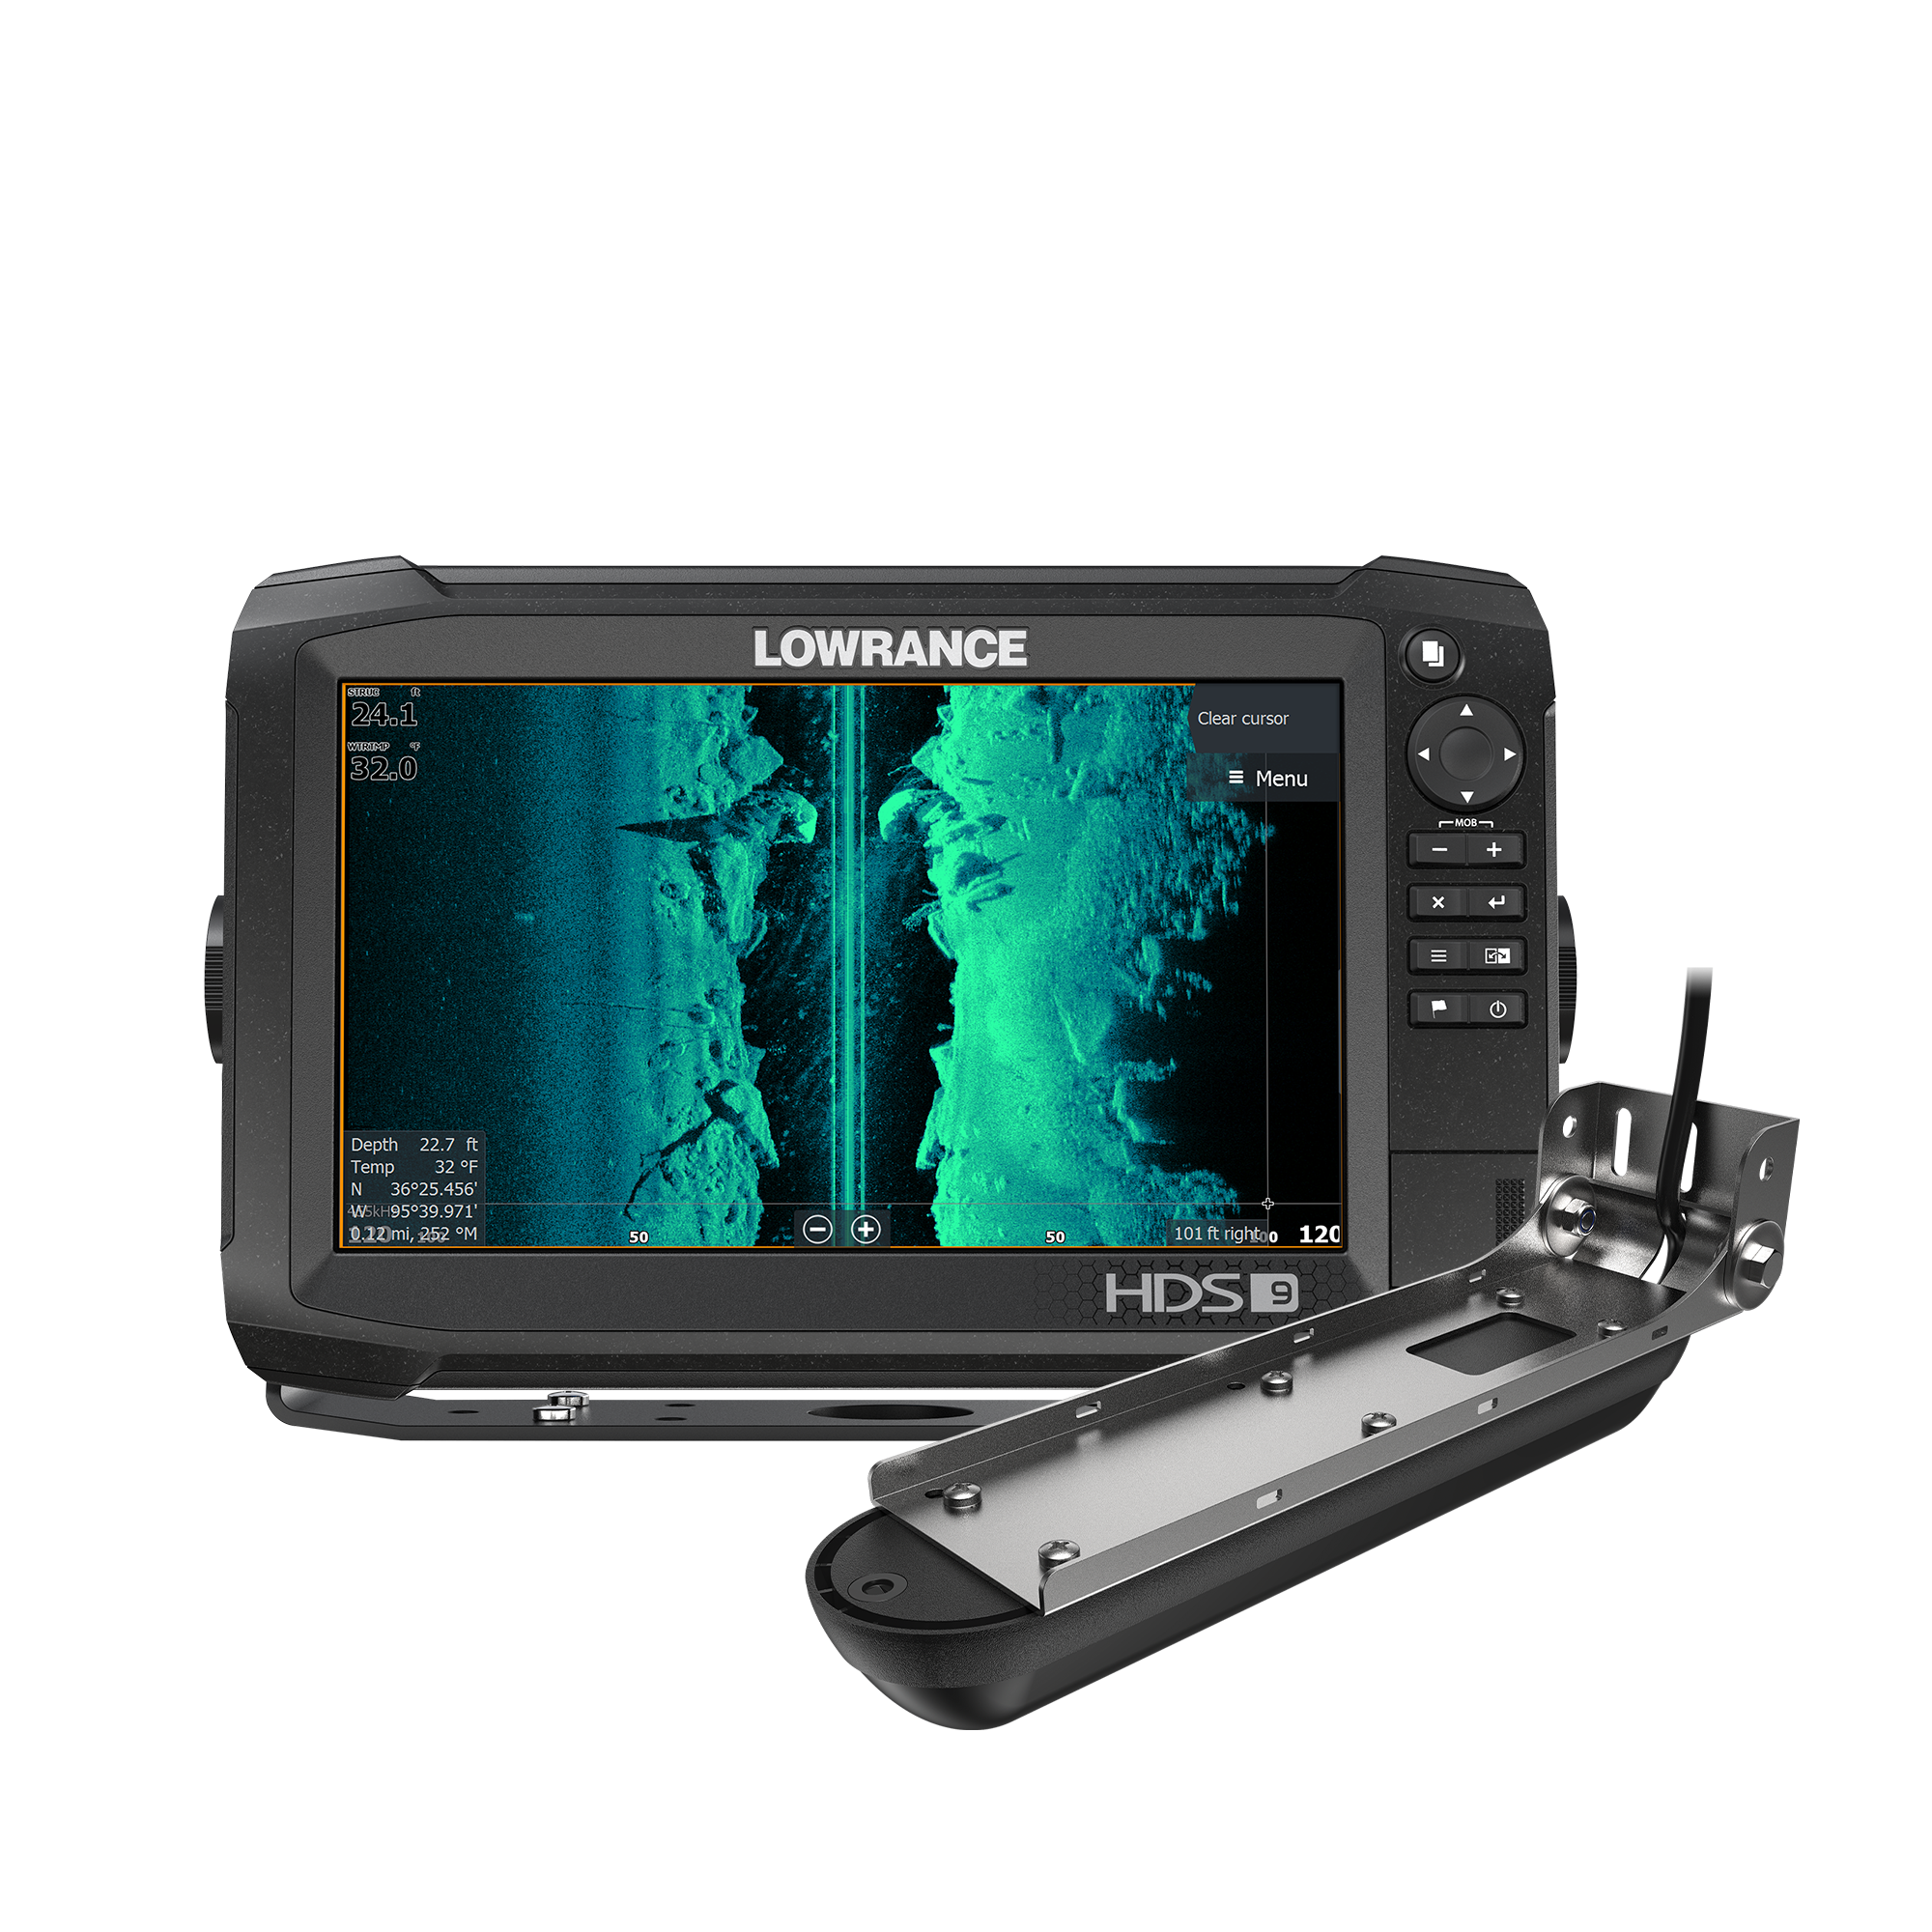 Lowrance Navico HDS-7 Carbon Insight with Total Scan Transducer